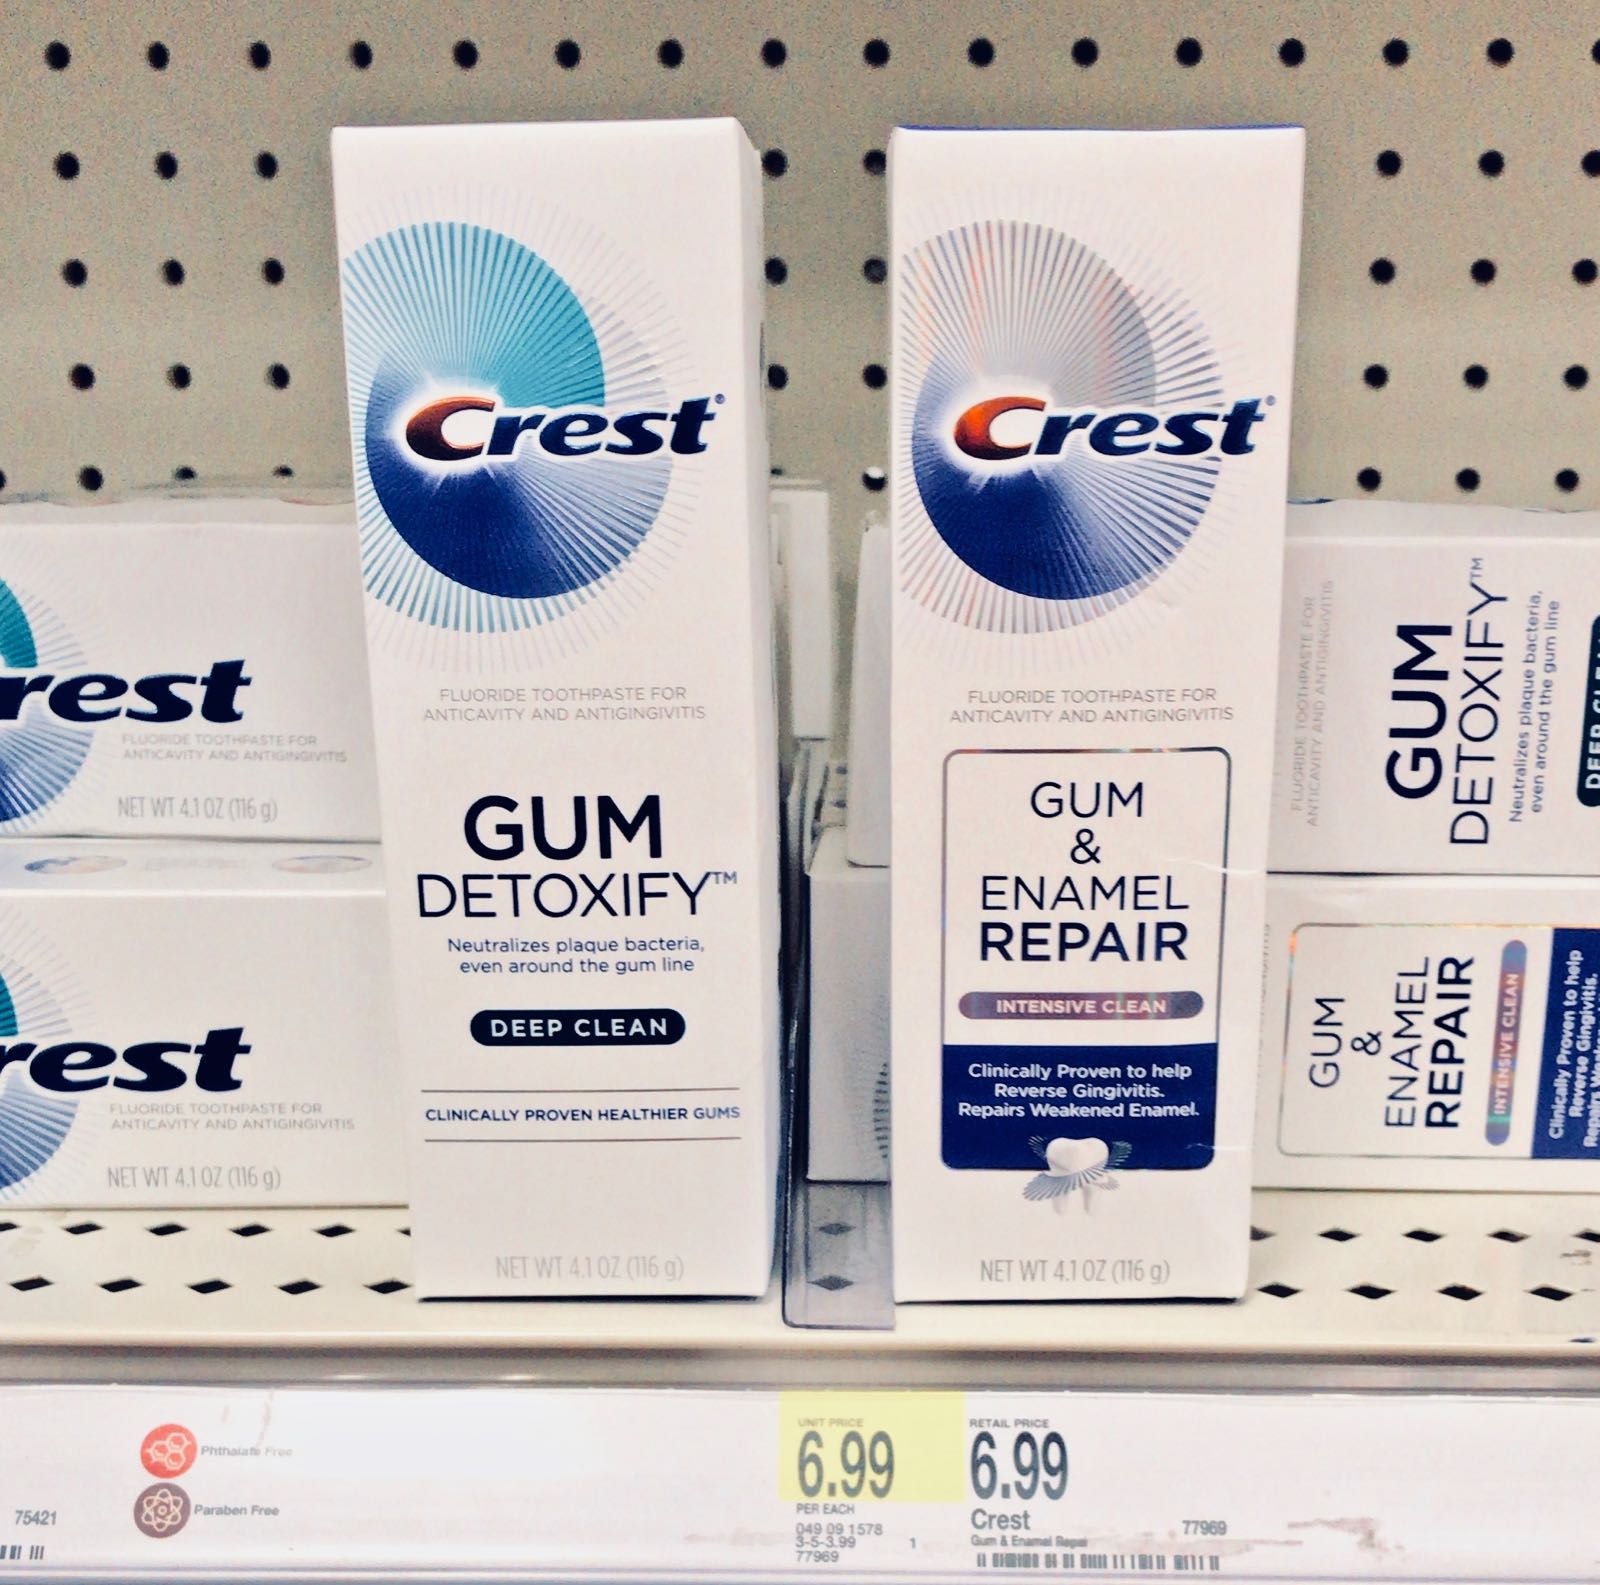 Save $2 on new Crest Gum and Enamel Repair at Target - click here to get the deal!